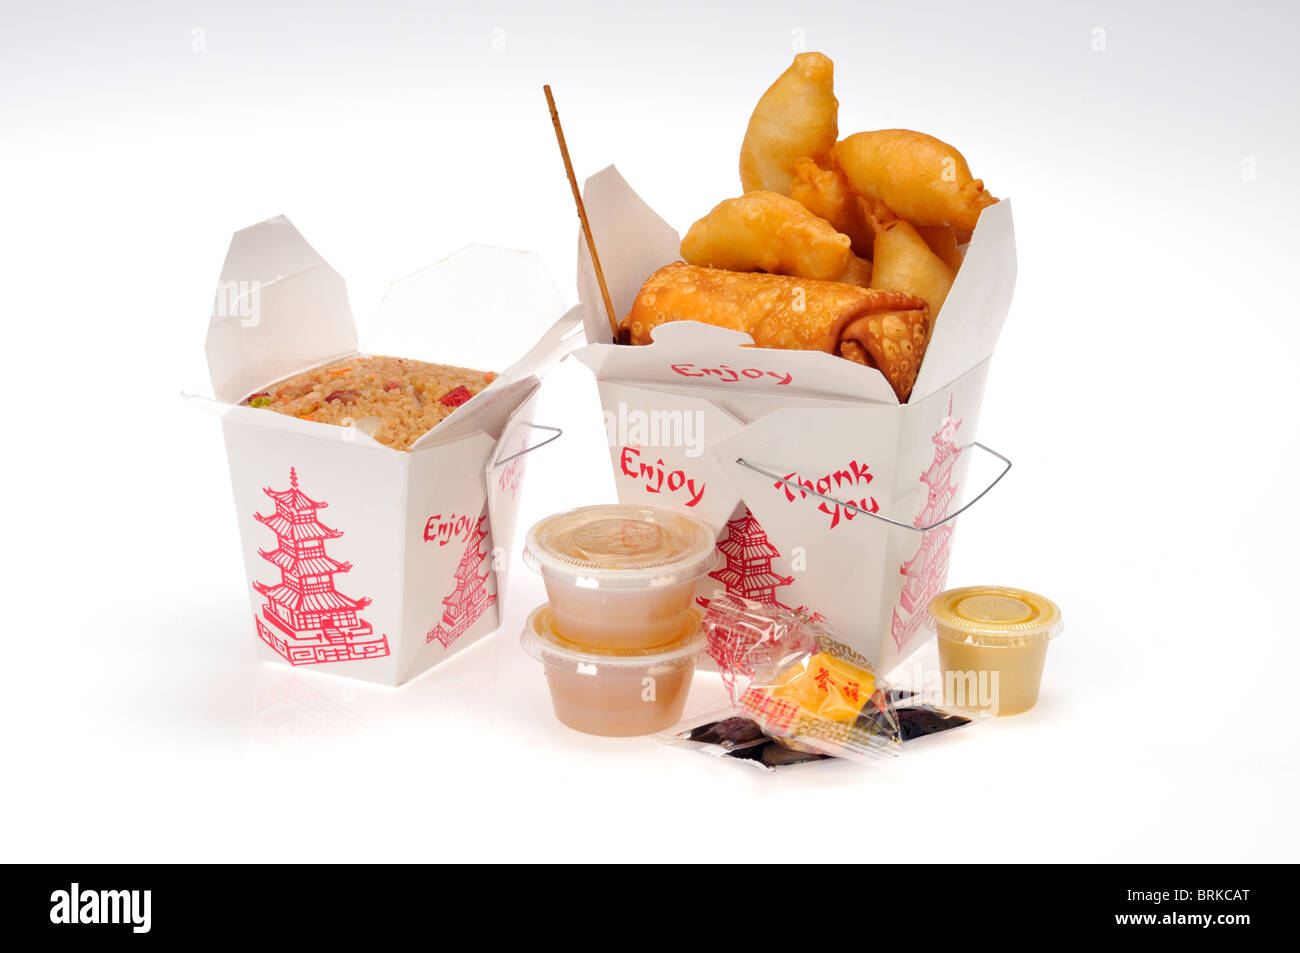 Take out chinese food cartons of pork fried rice and chicken fingers with an eggroll on white background. Stock Photo